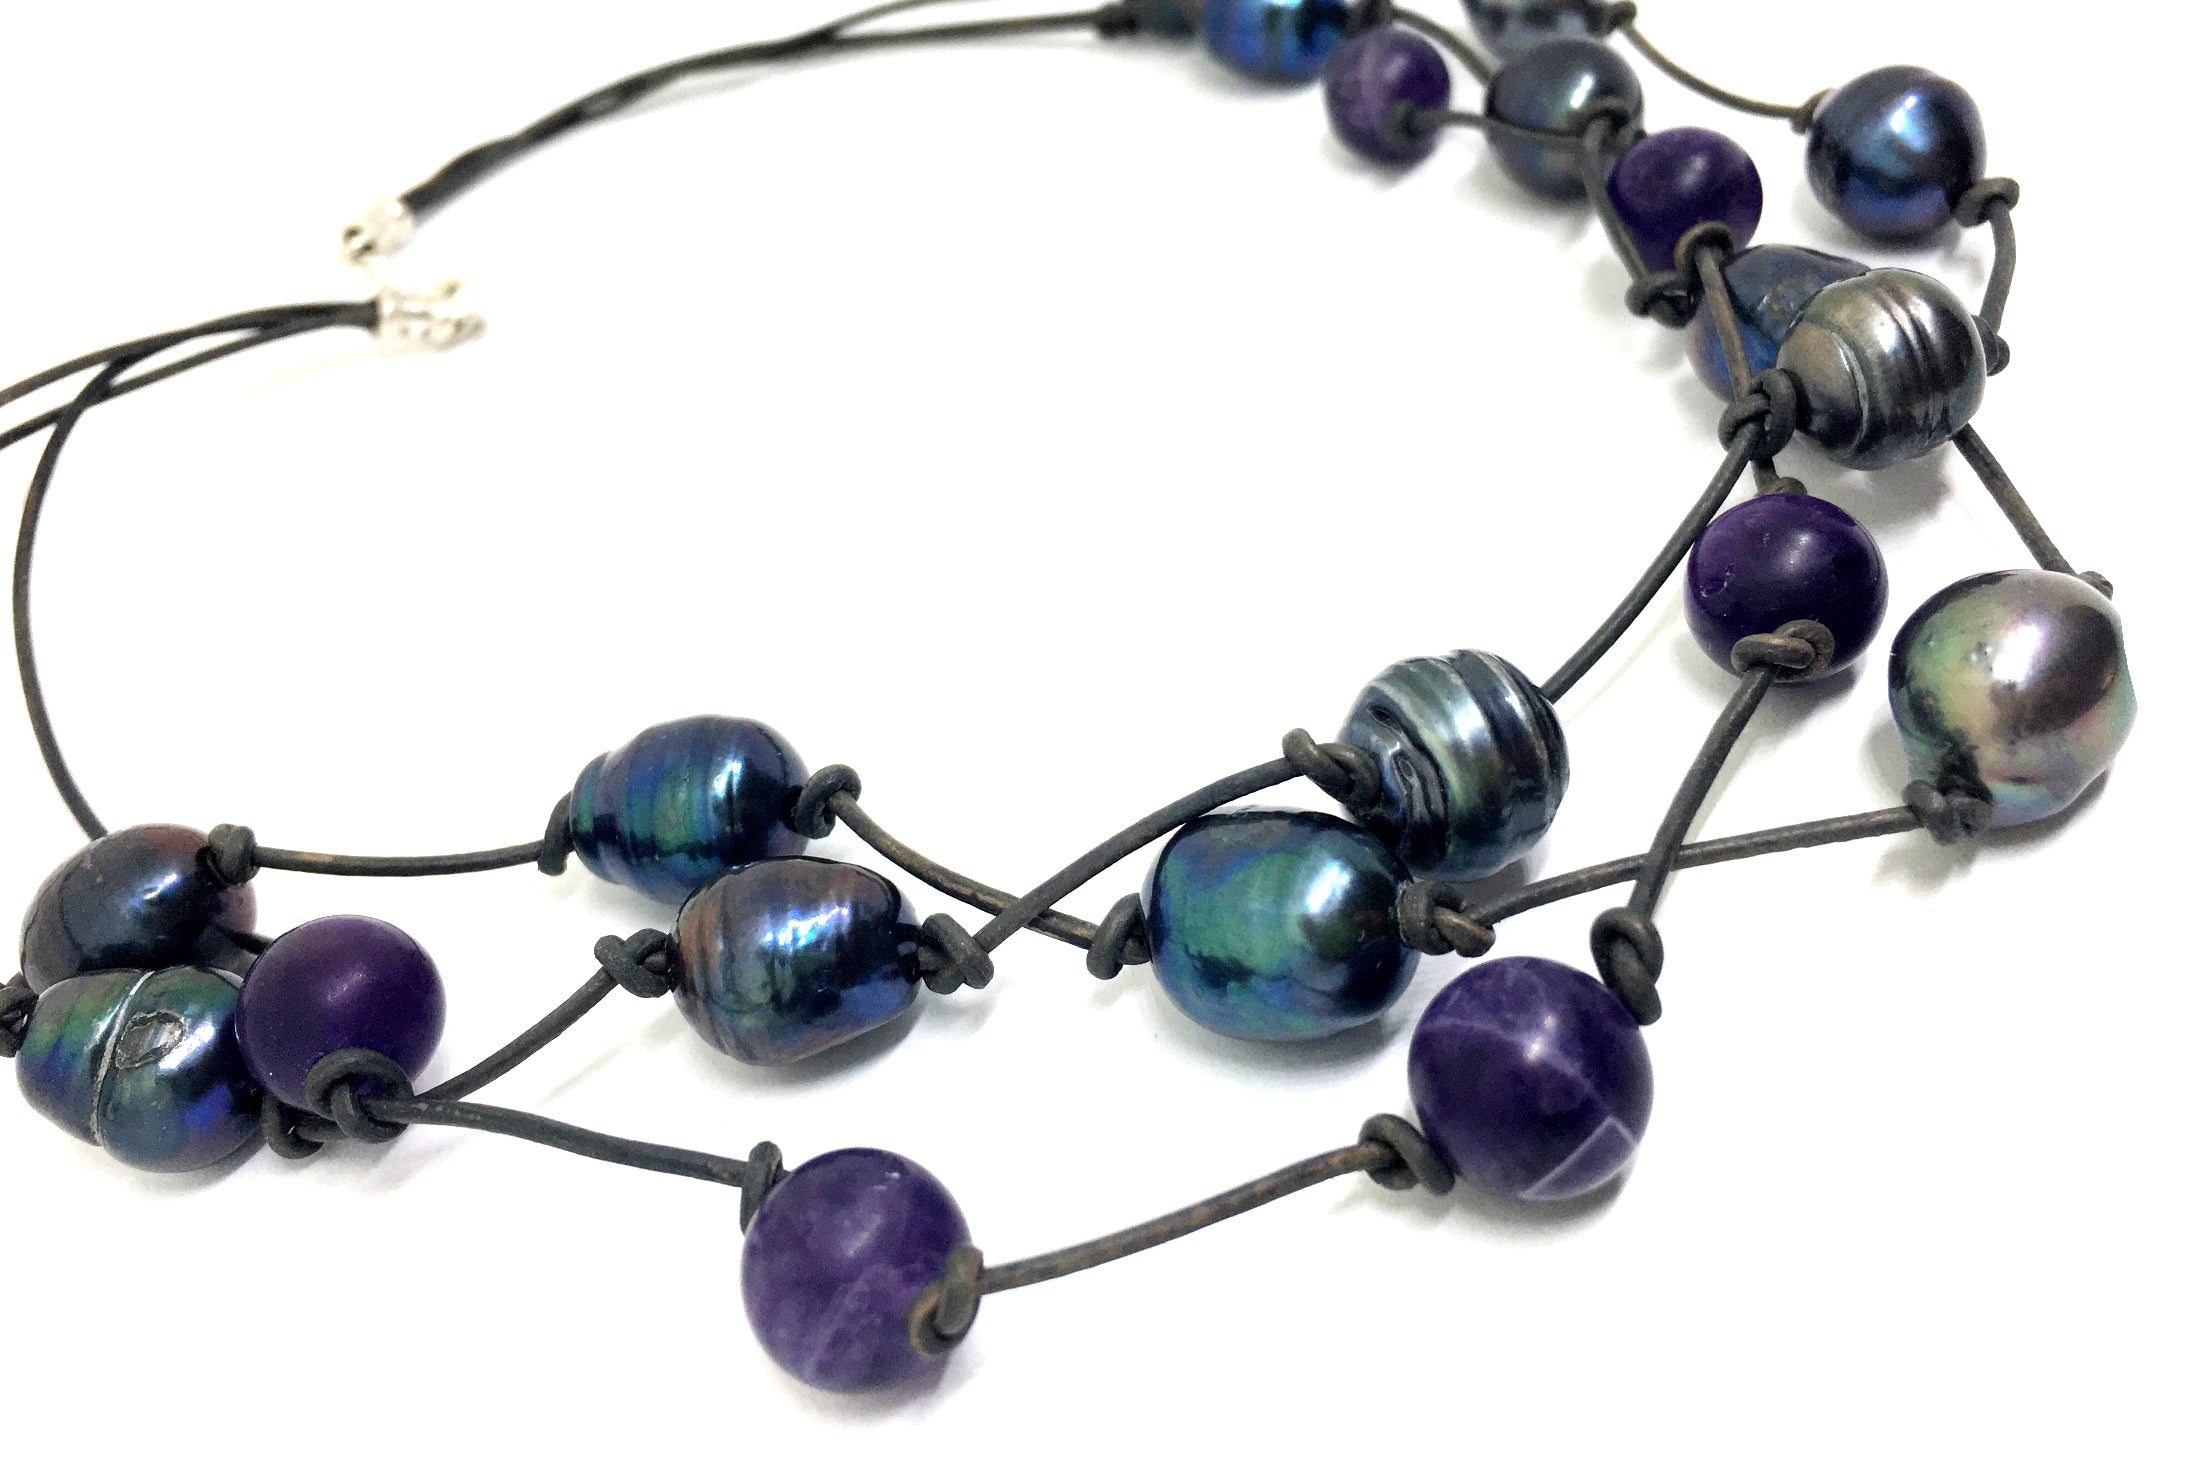 Baroque Peacock Black Pearl and Amethyst Triple Strand Knotted Leather Necklace